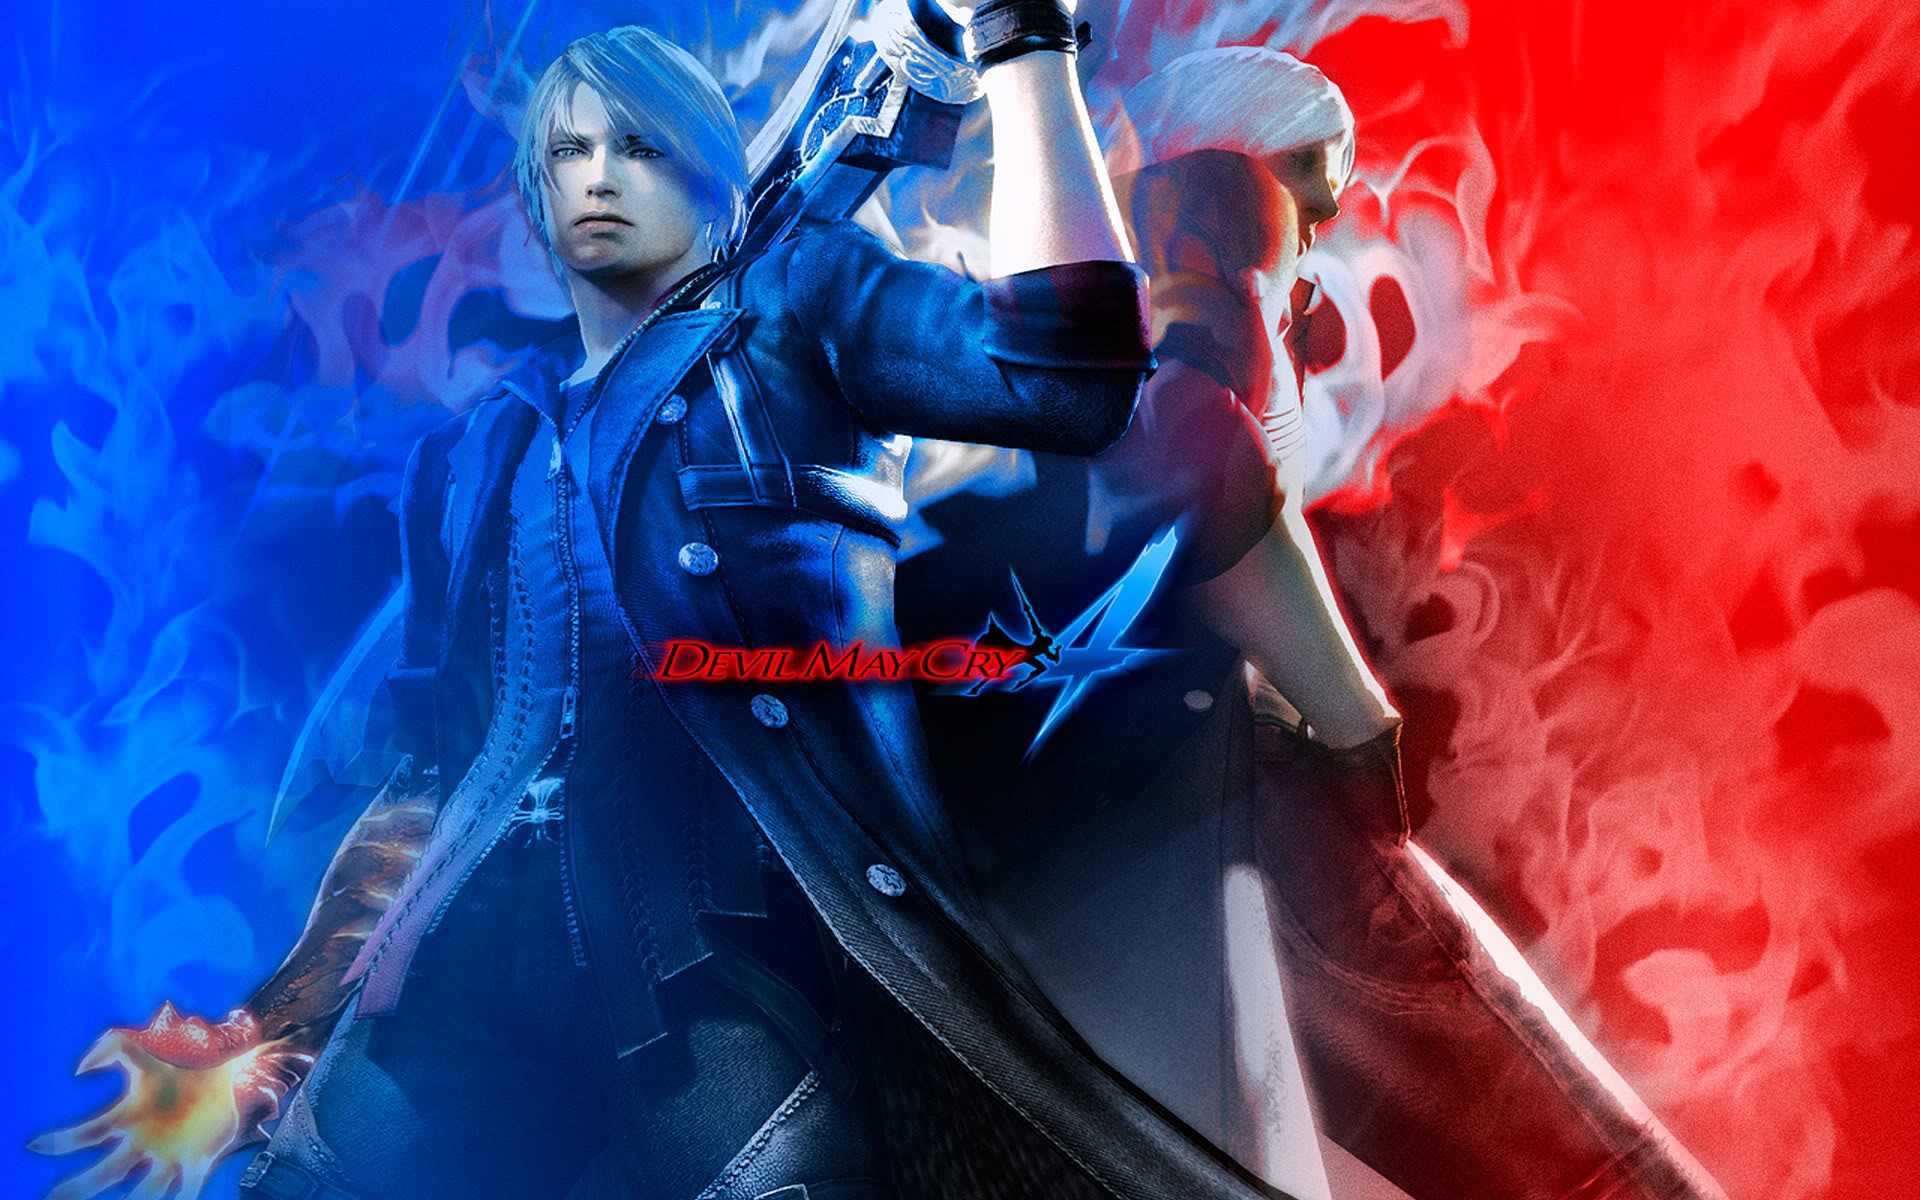 Thursday 30th April 2015 Devil May Cry 4 HD Backgrounds for PC